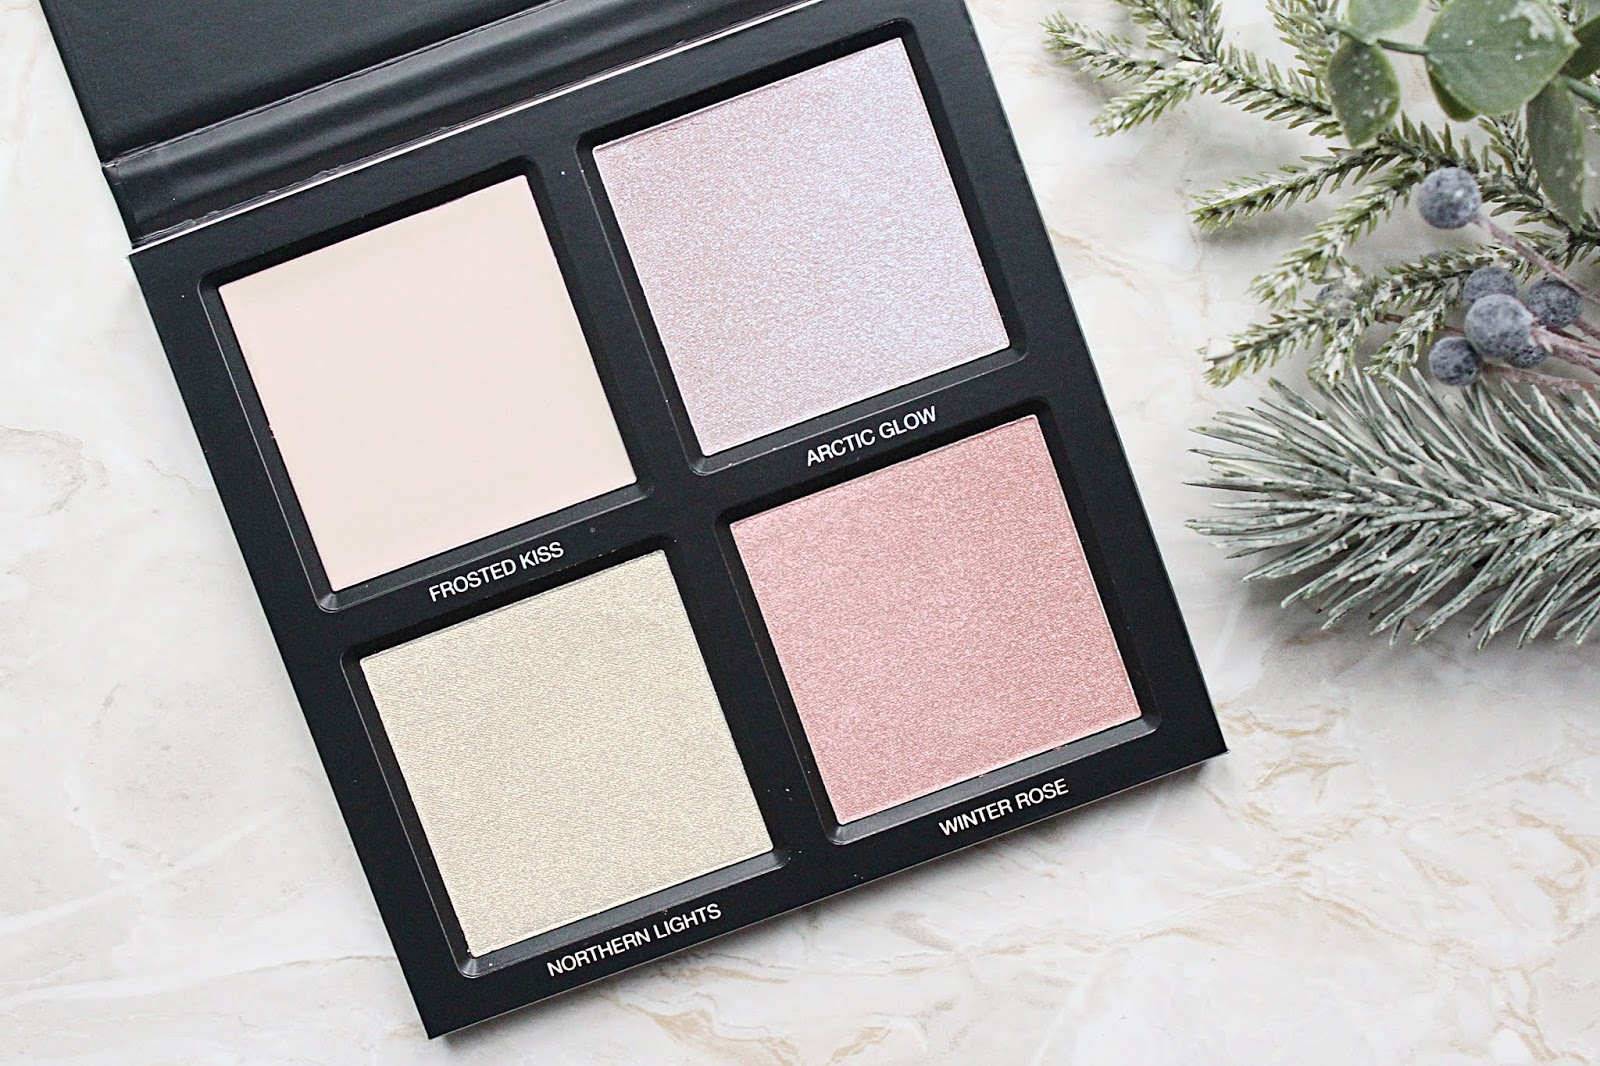 Huda Beauty Winter Solstice Highlighting Palette Review 